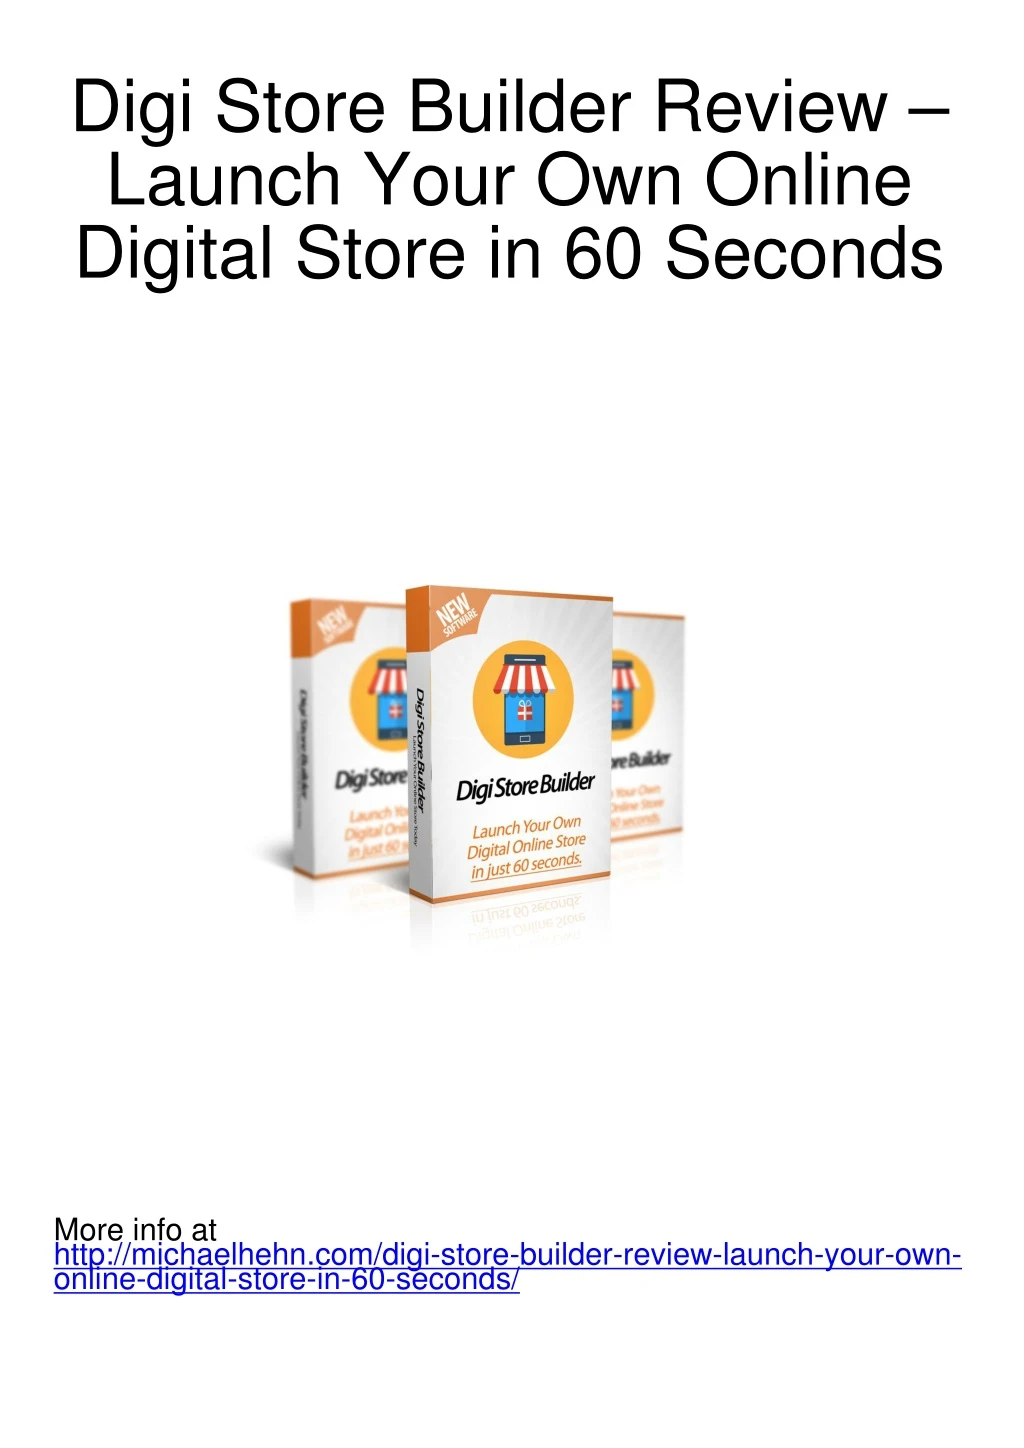 digi store builder review launch your own online